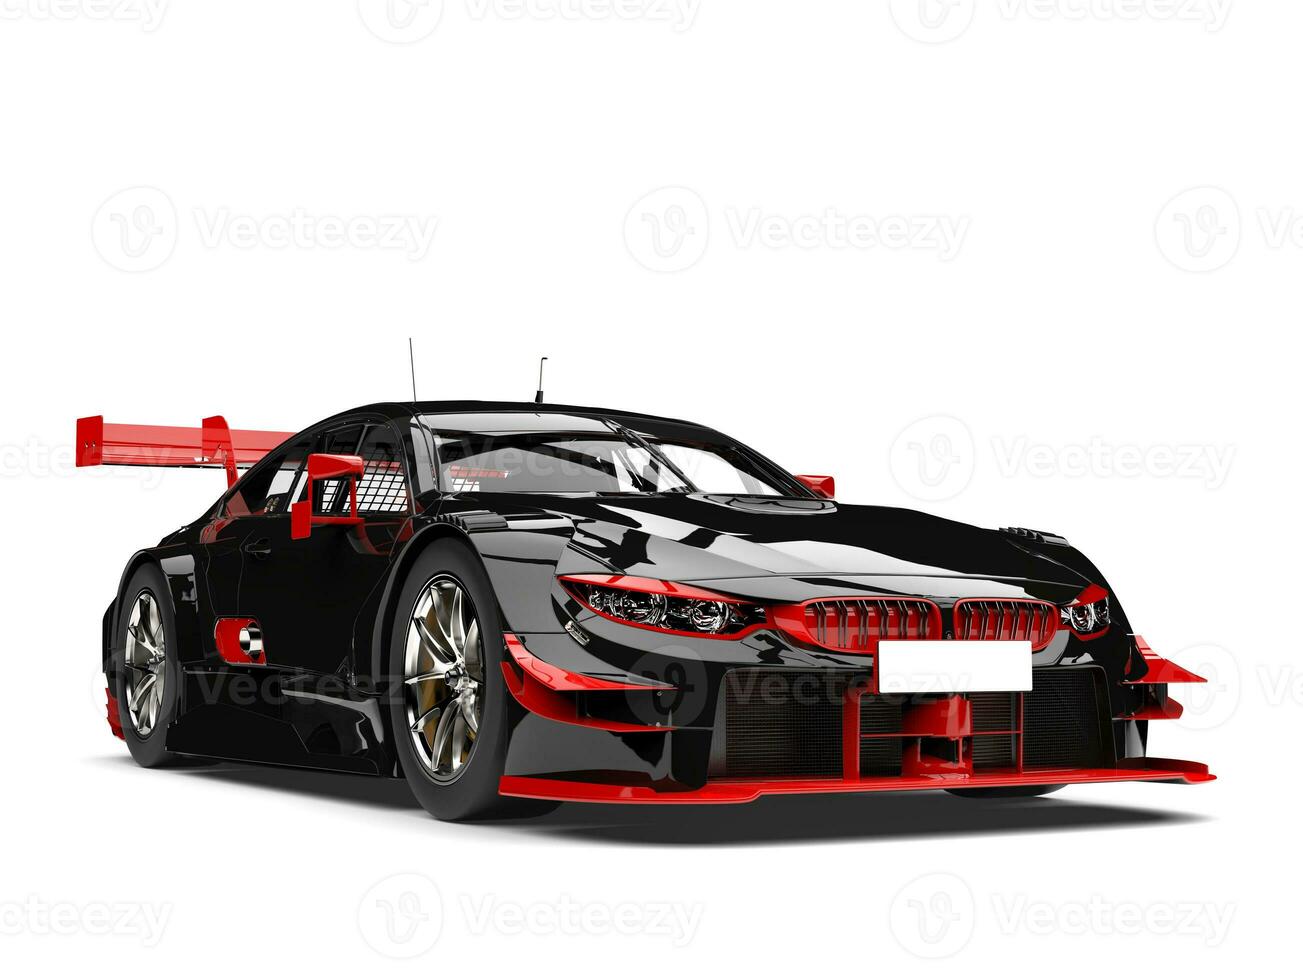 Amazing dark racing car with red details photo